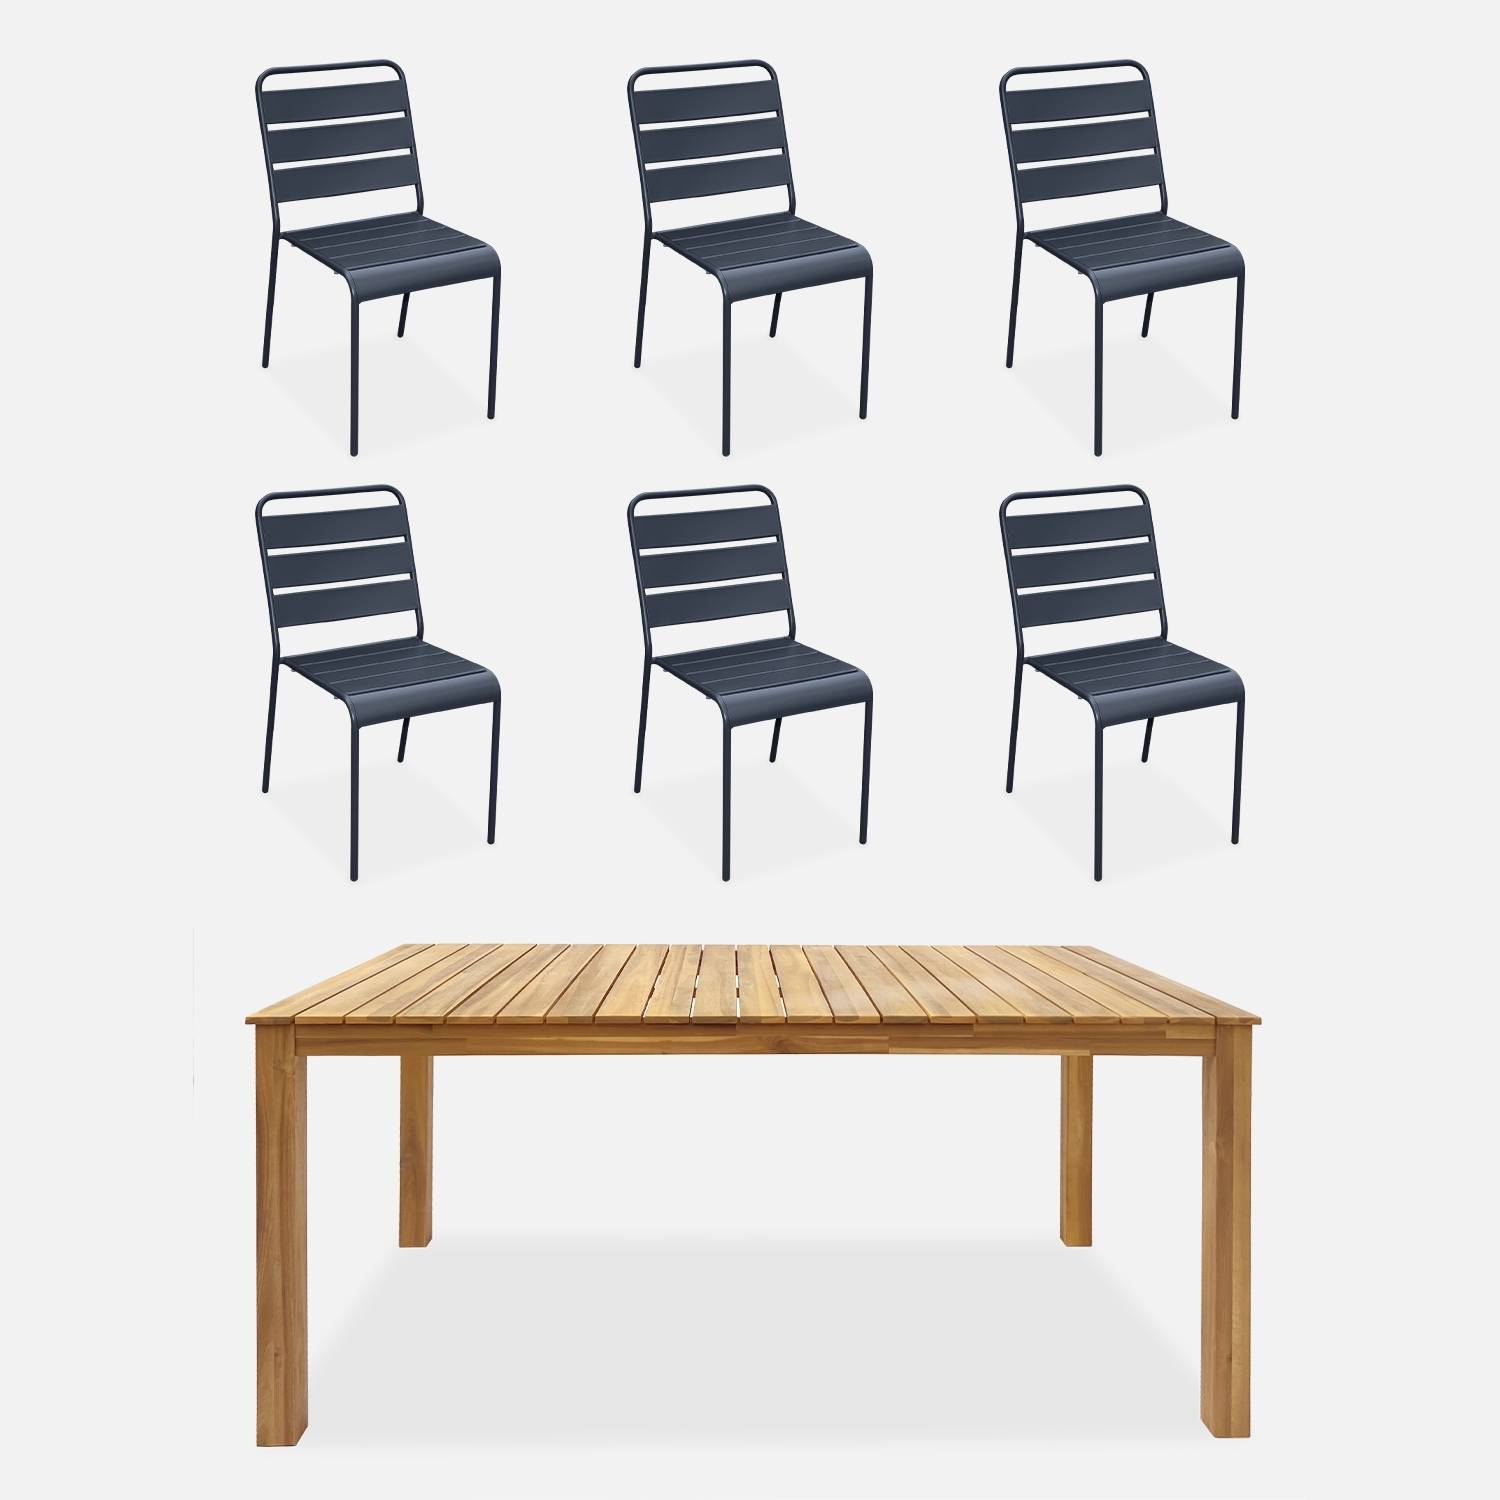 Table bois d'acacia + 6 chaises empilables gris I sweeek